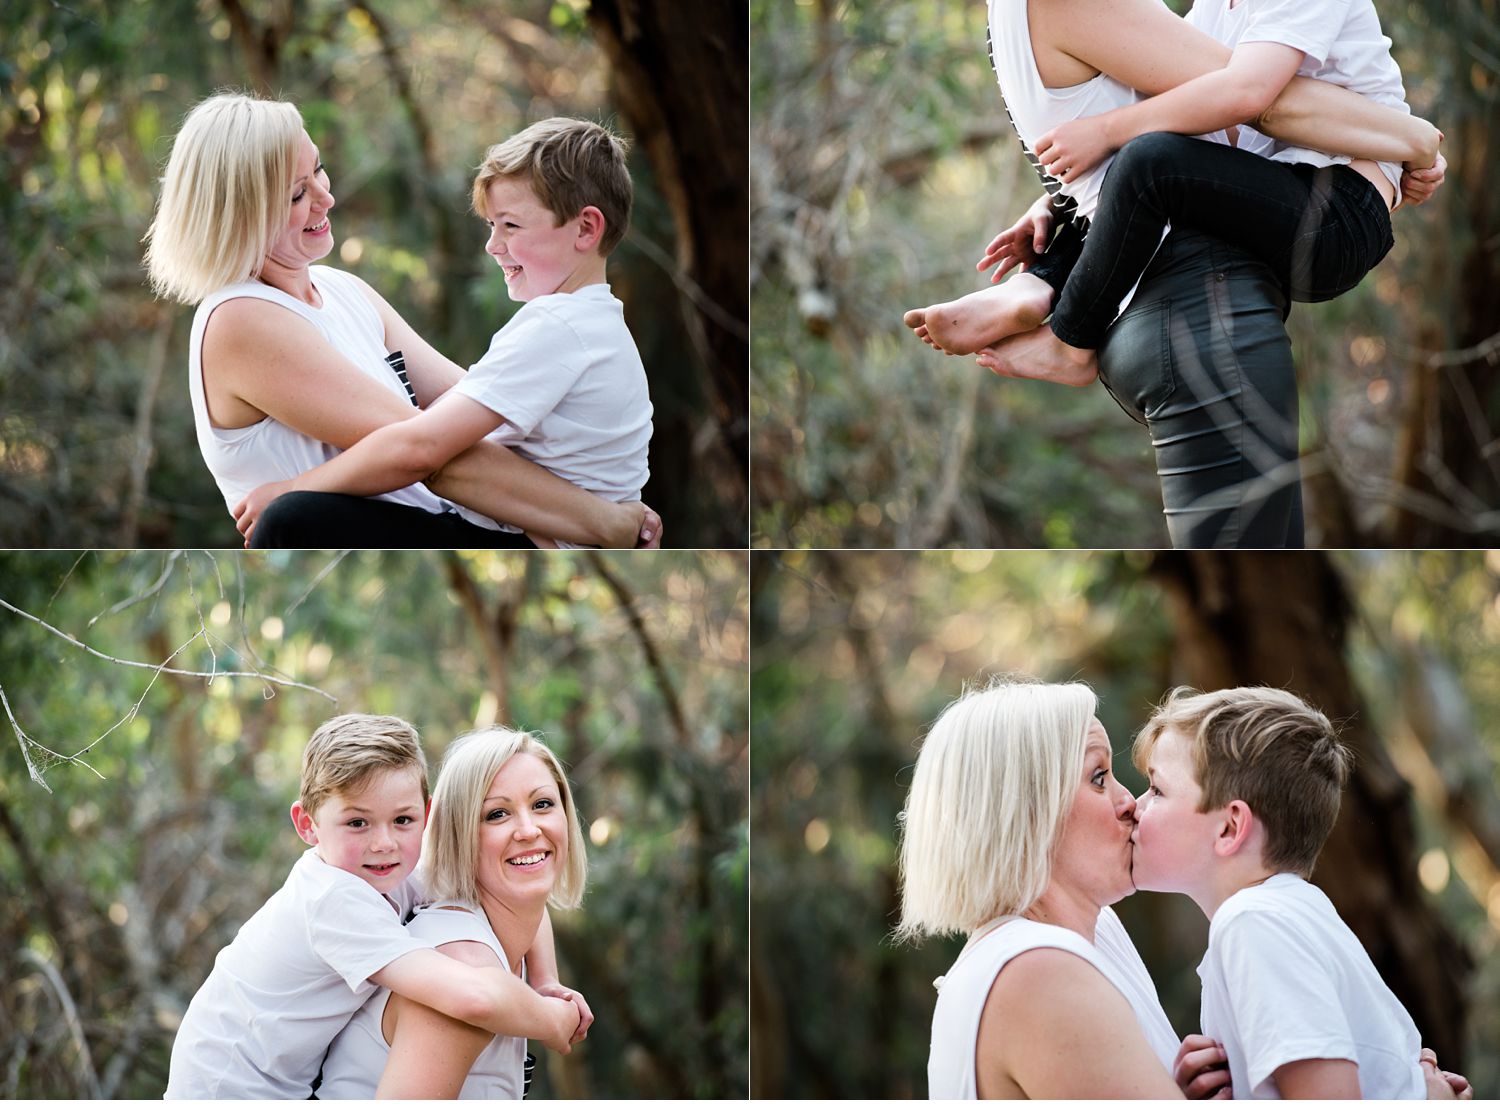 mother-son-photography-session.jpg